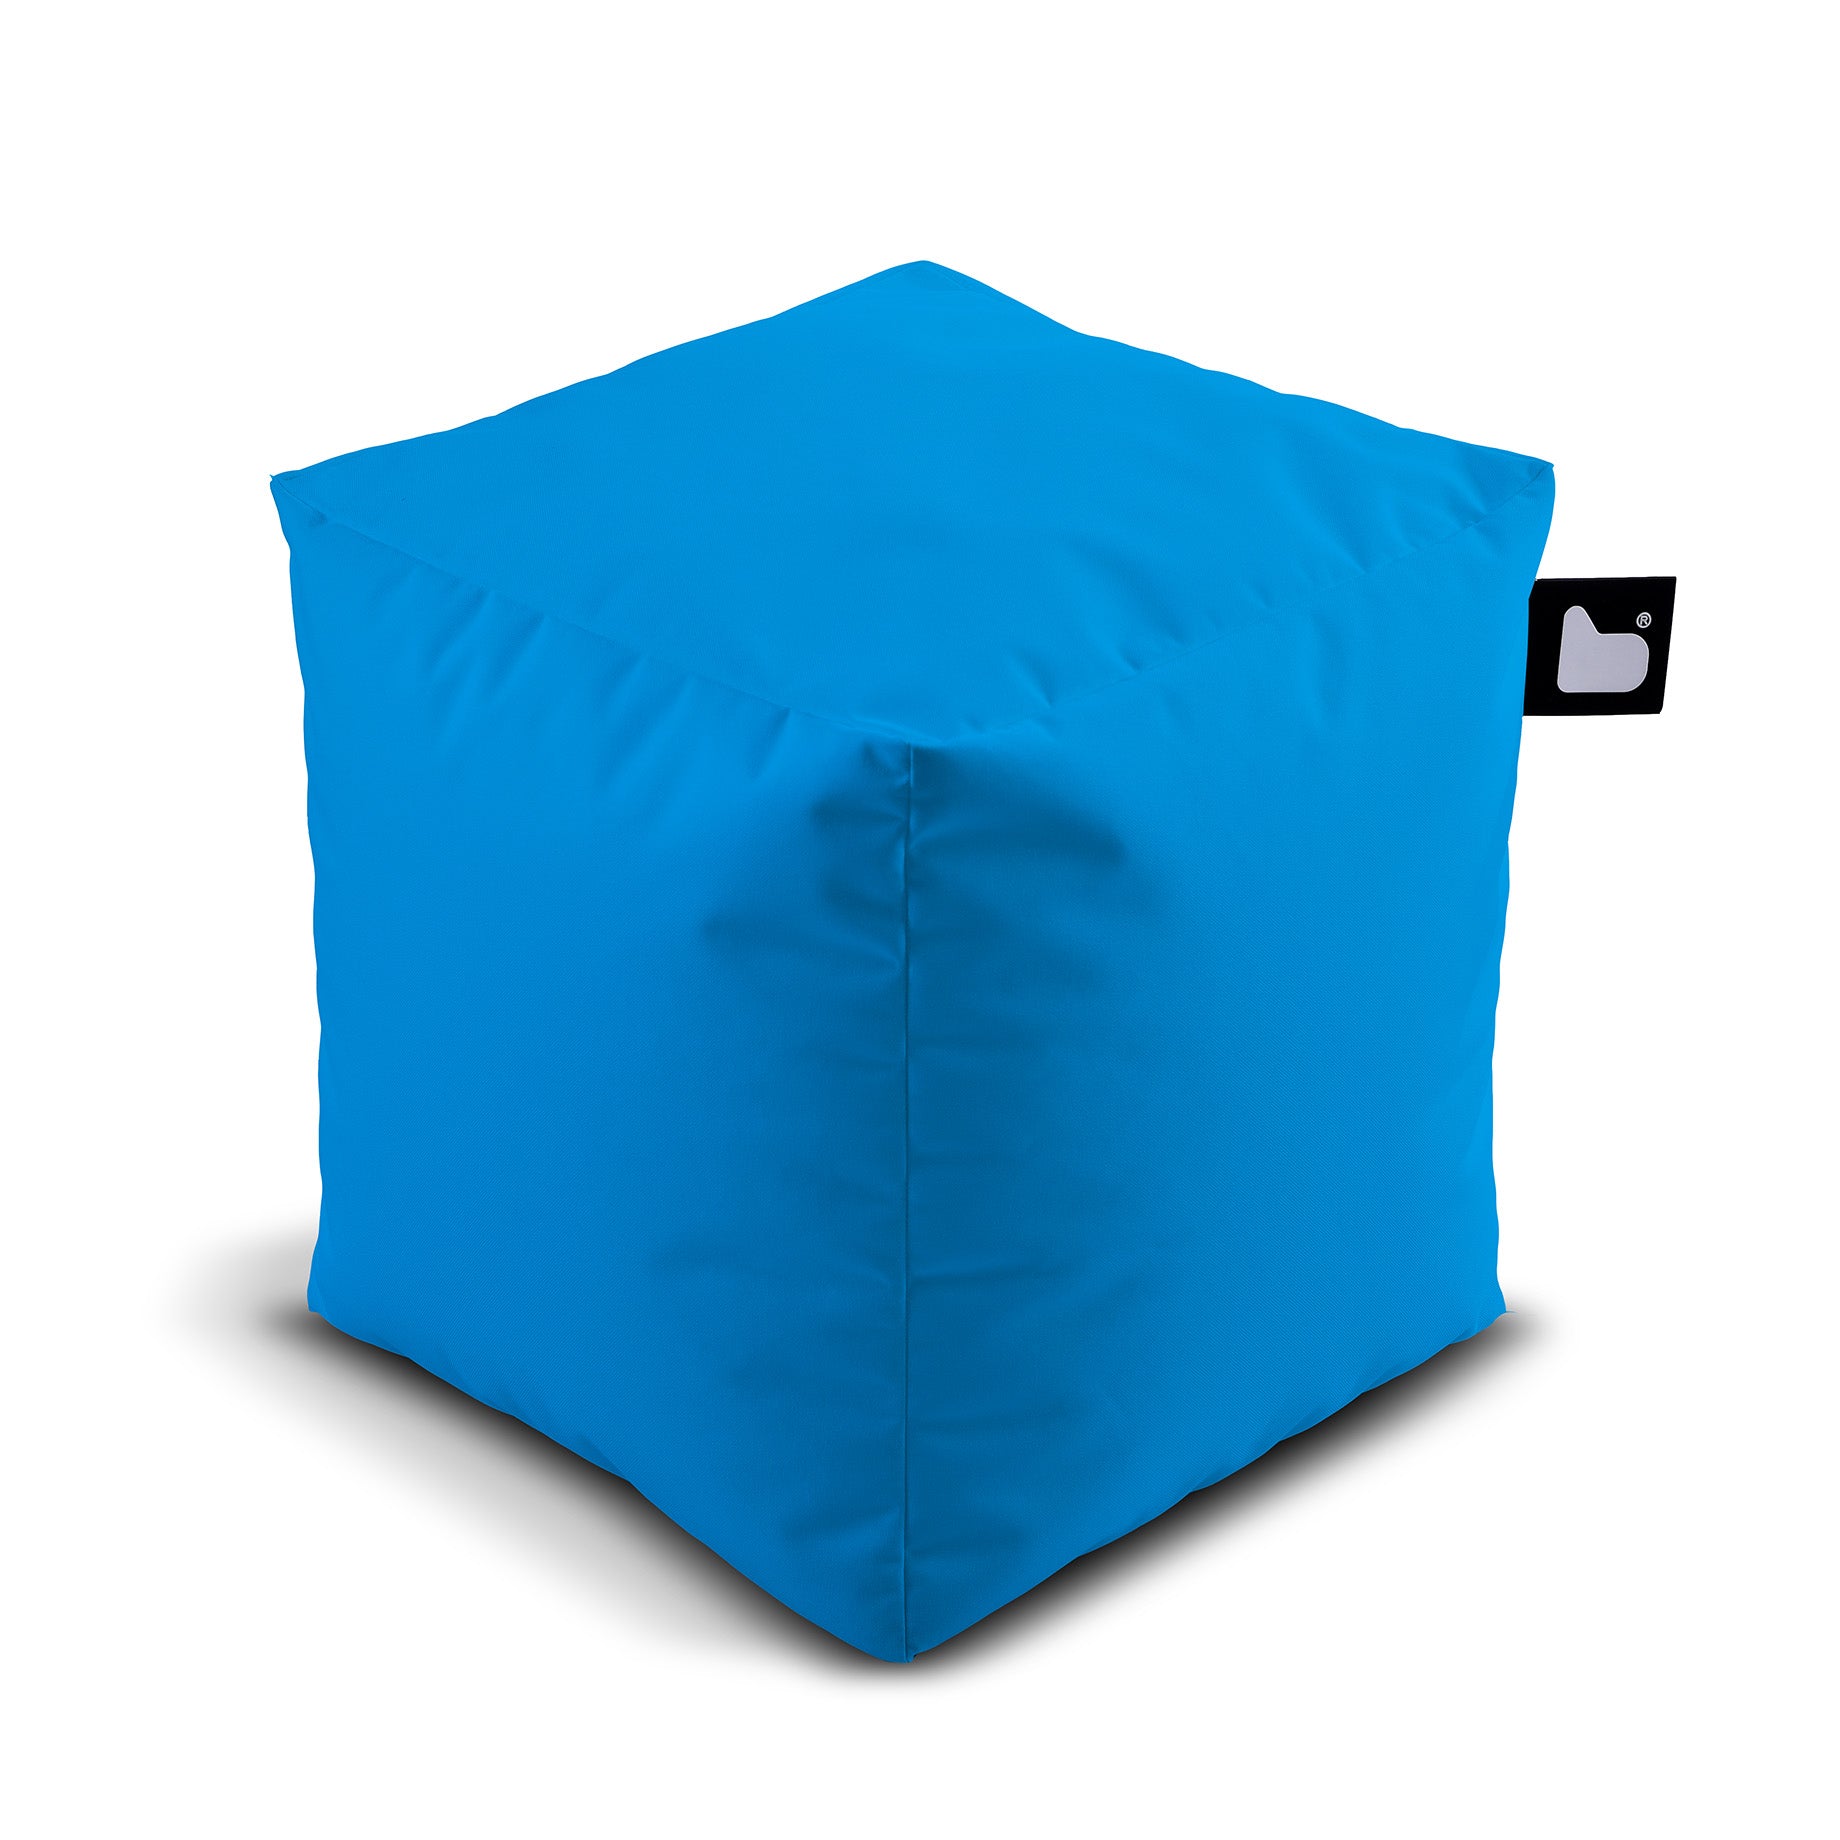 Extreme Lounging B-Box Outdoor Beanbag Pouf